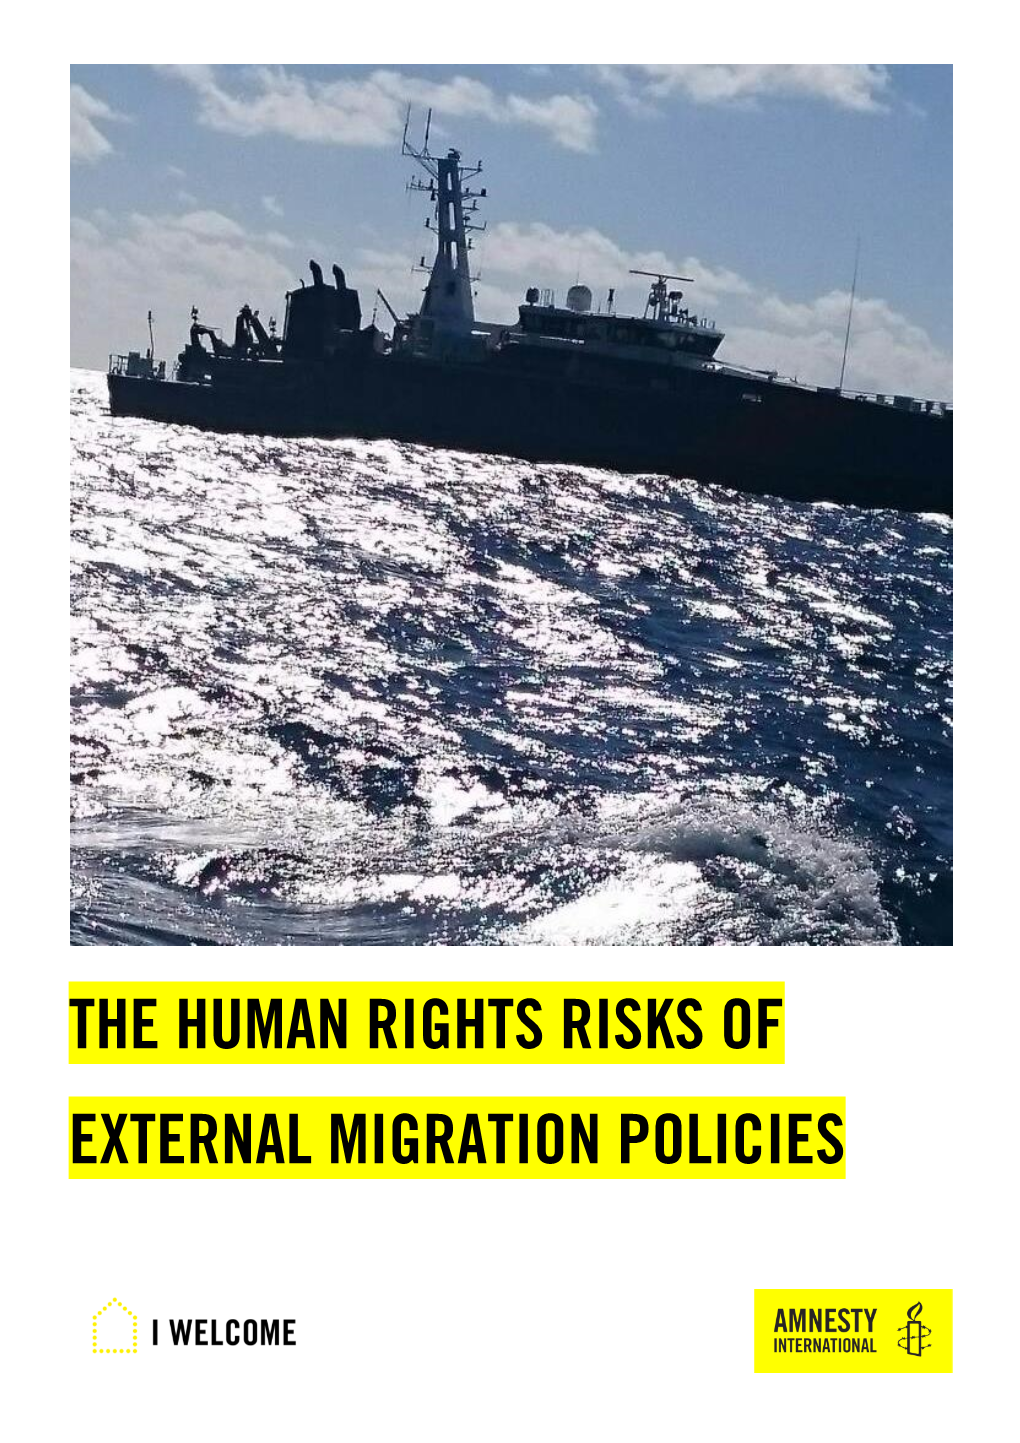 The Human Rights Risks of External Migration Policies